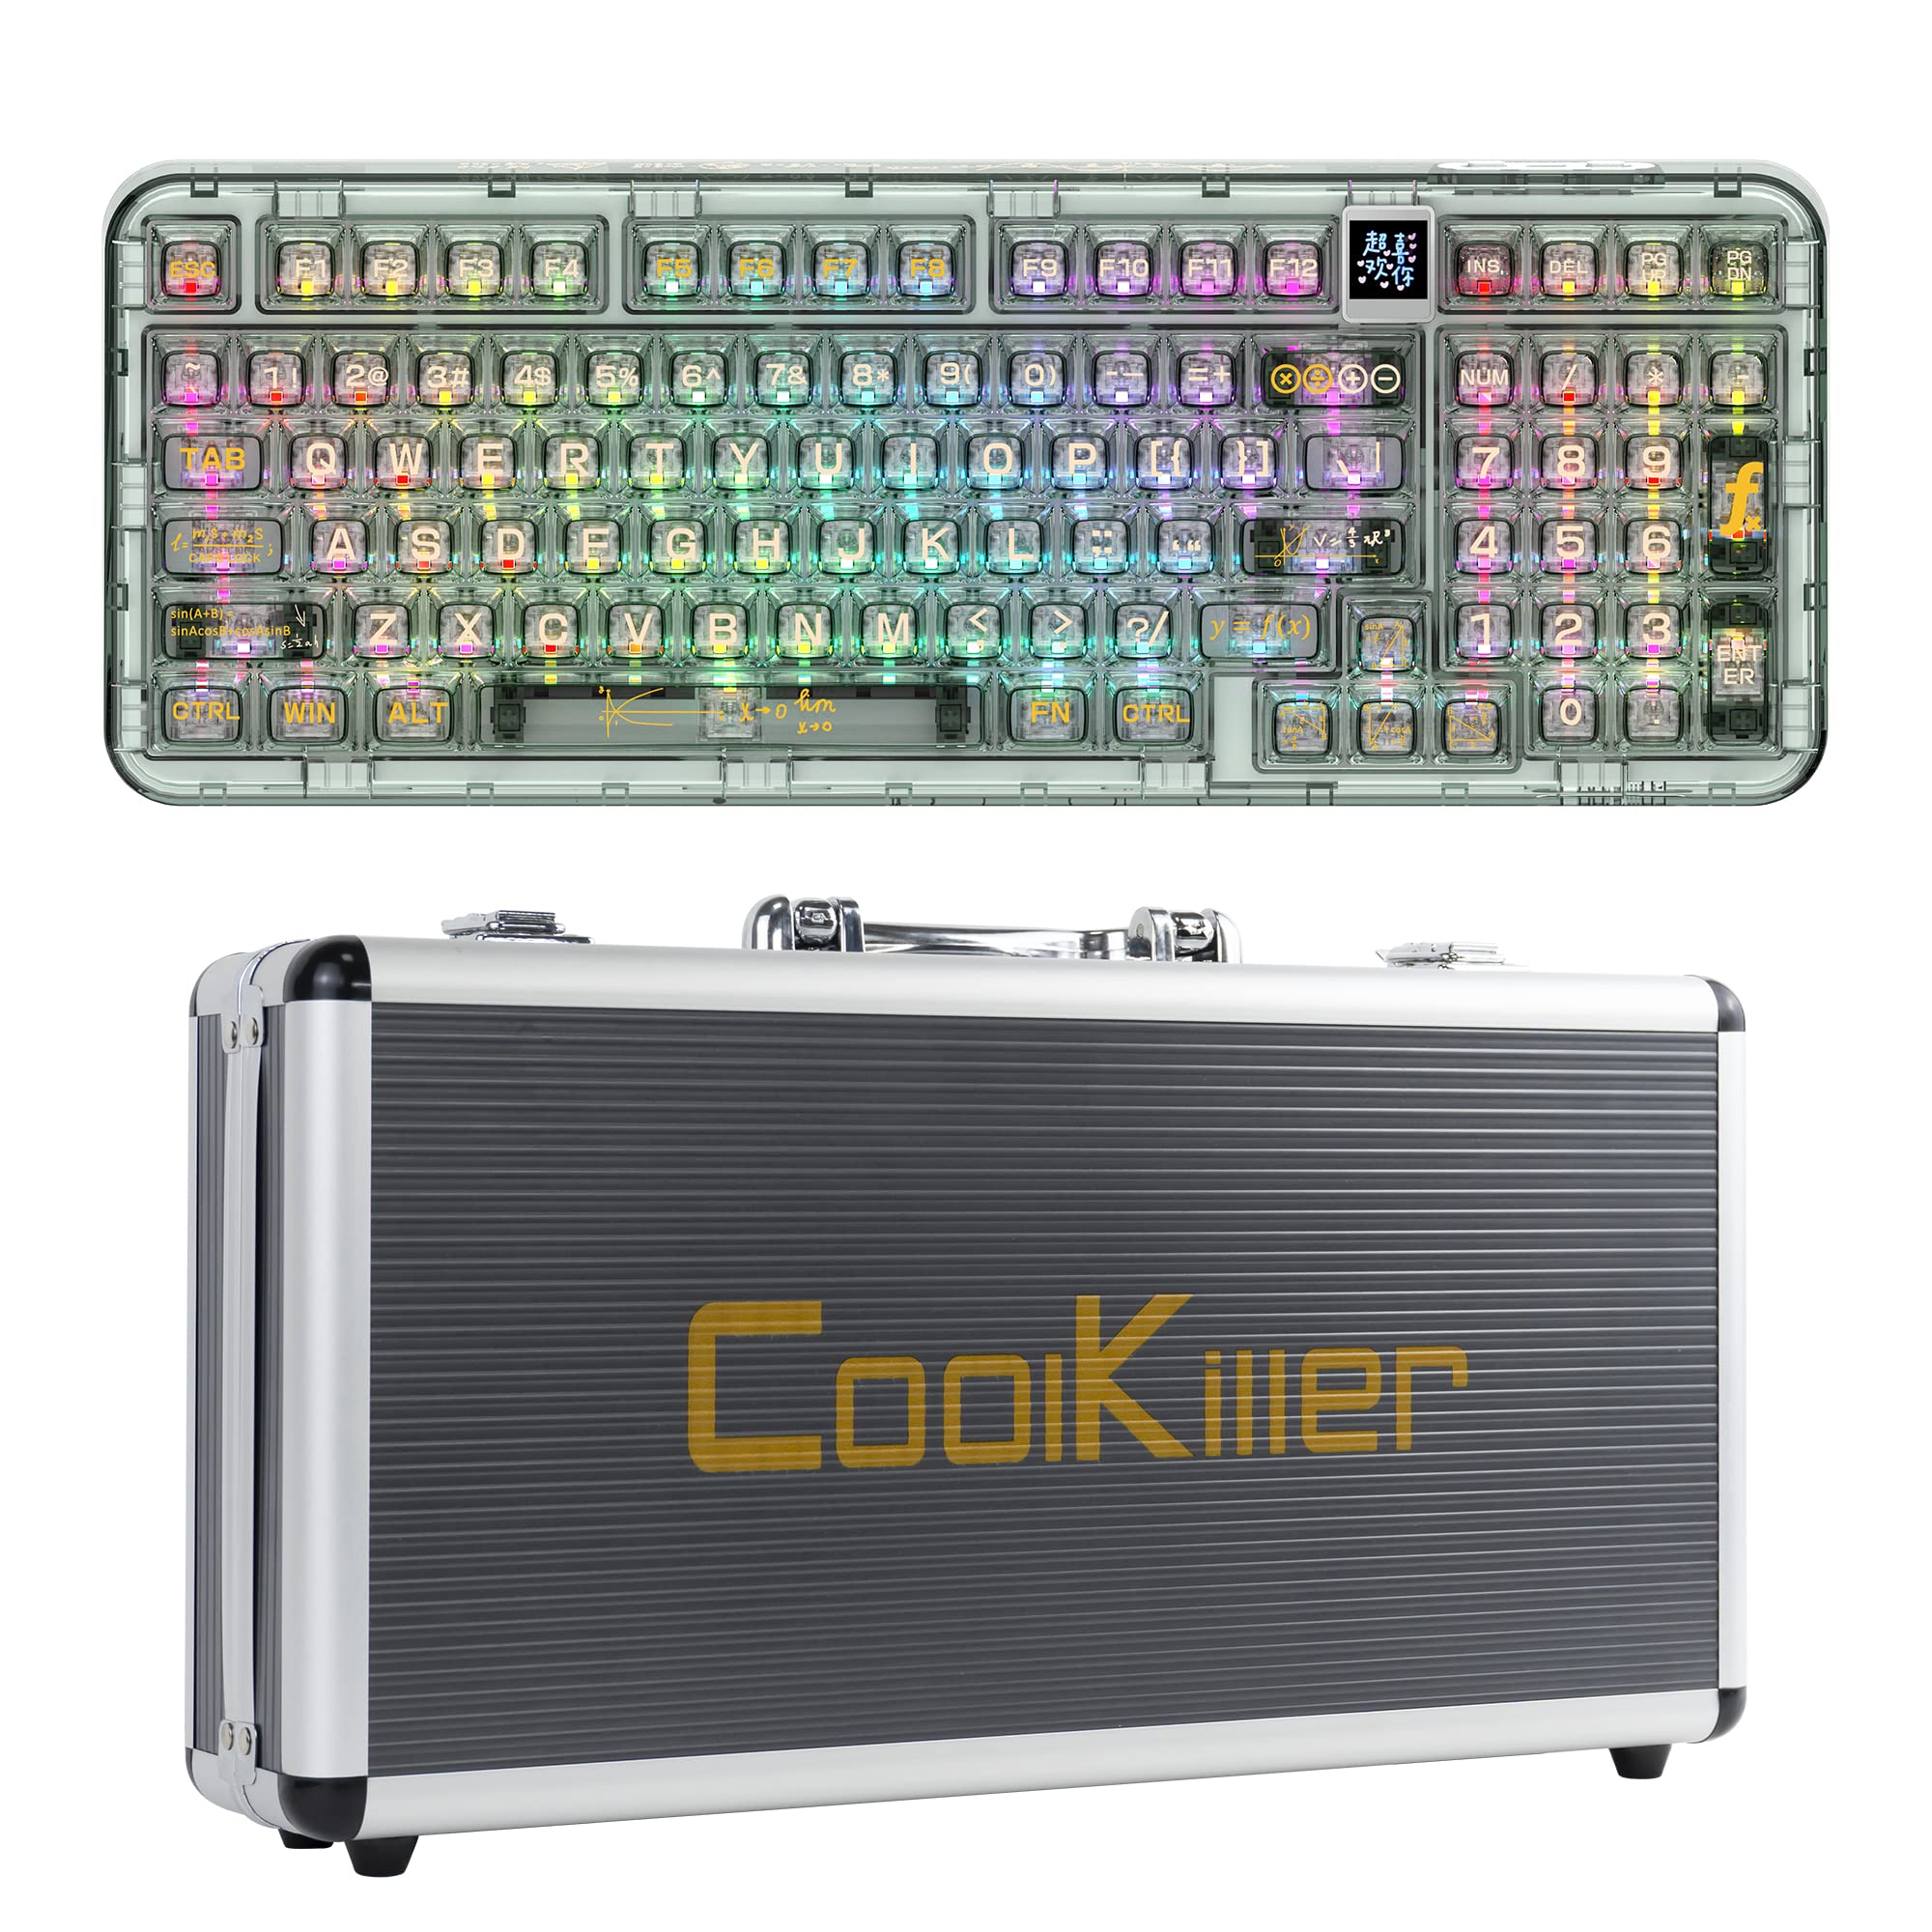 YUNZII Coolkiller CK98 Wireless Hot Swappable Mechanical Keyboard with OLED, 1800 Layout Transparent Acrylic Gasket Mounted Keyboard for for Windows/Mac (Ice Blade Switch, Math and Metal Box)